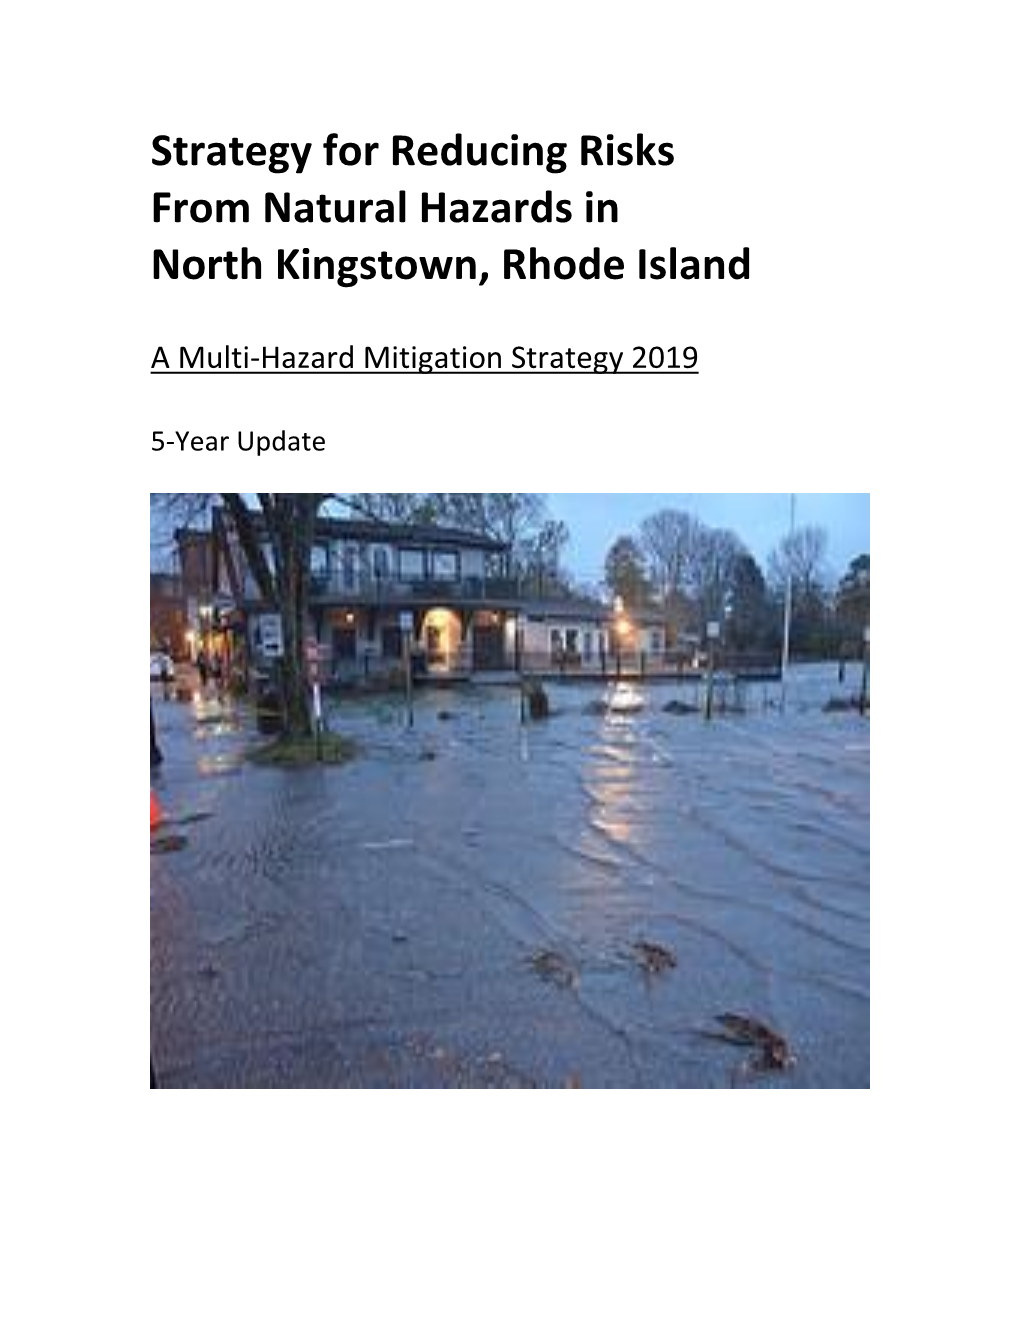 Strategy for Reducing Risks from Natural Hazards in North Kingstown, Rhode Island